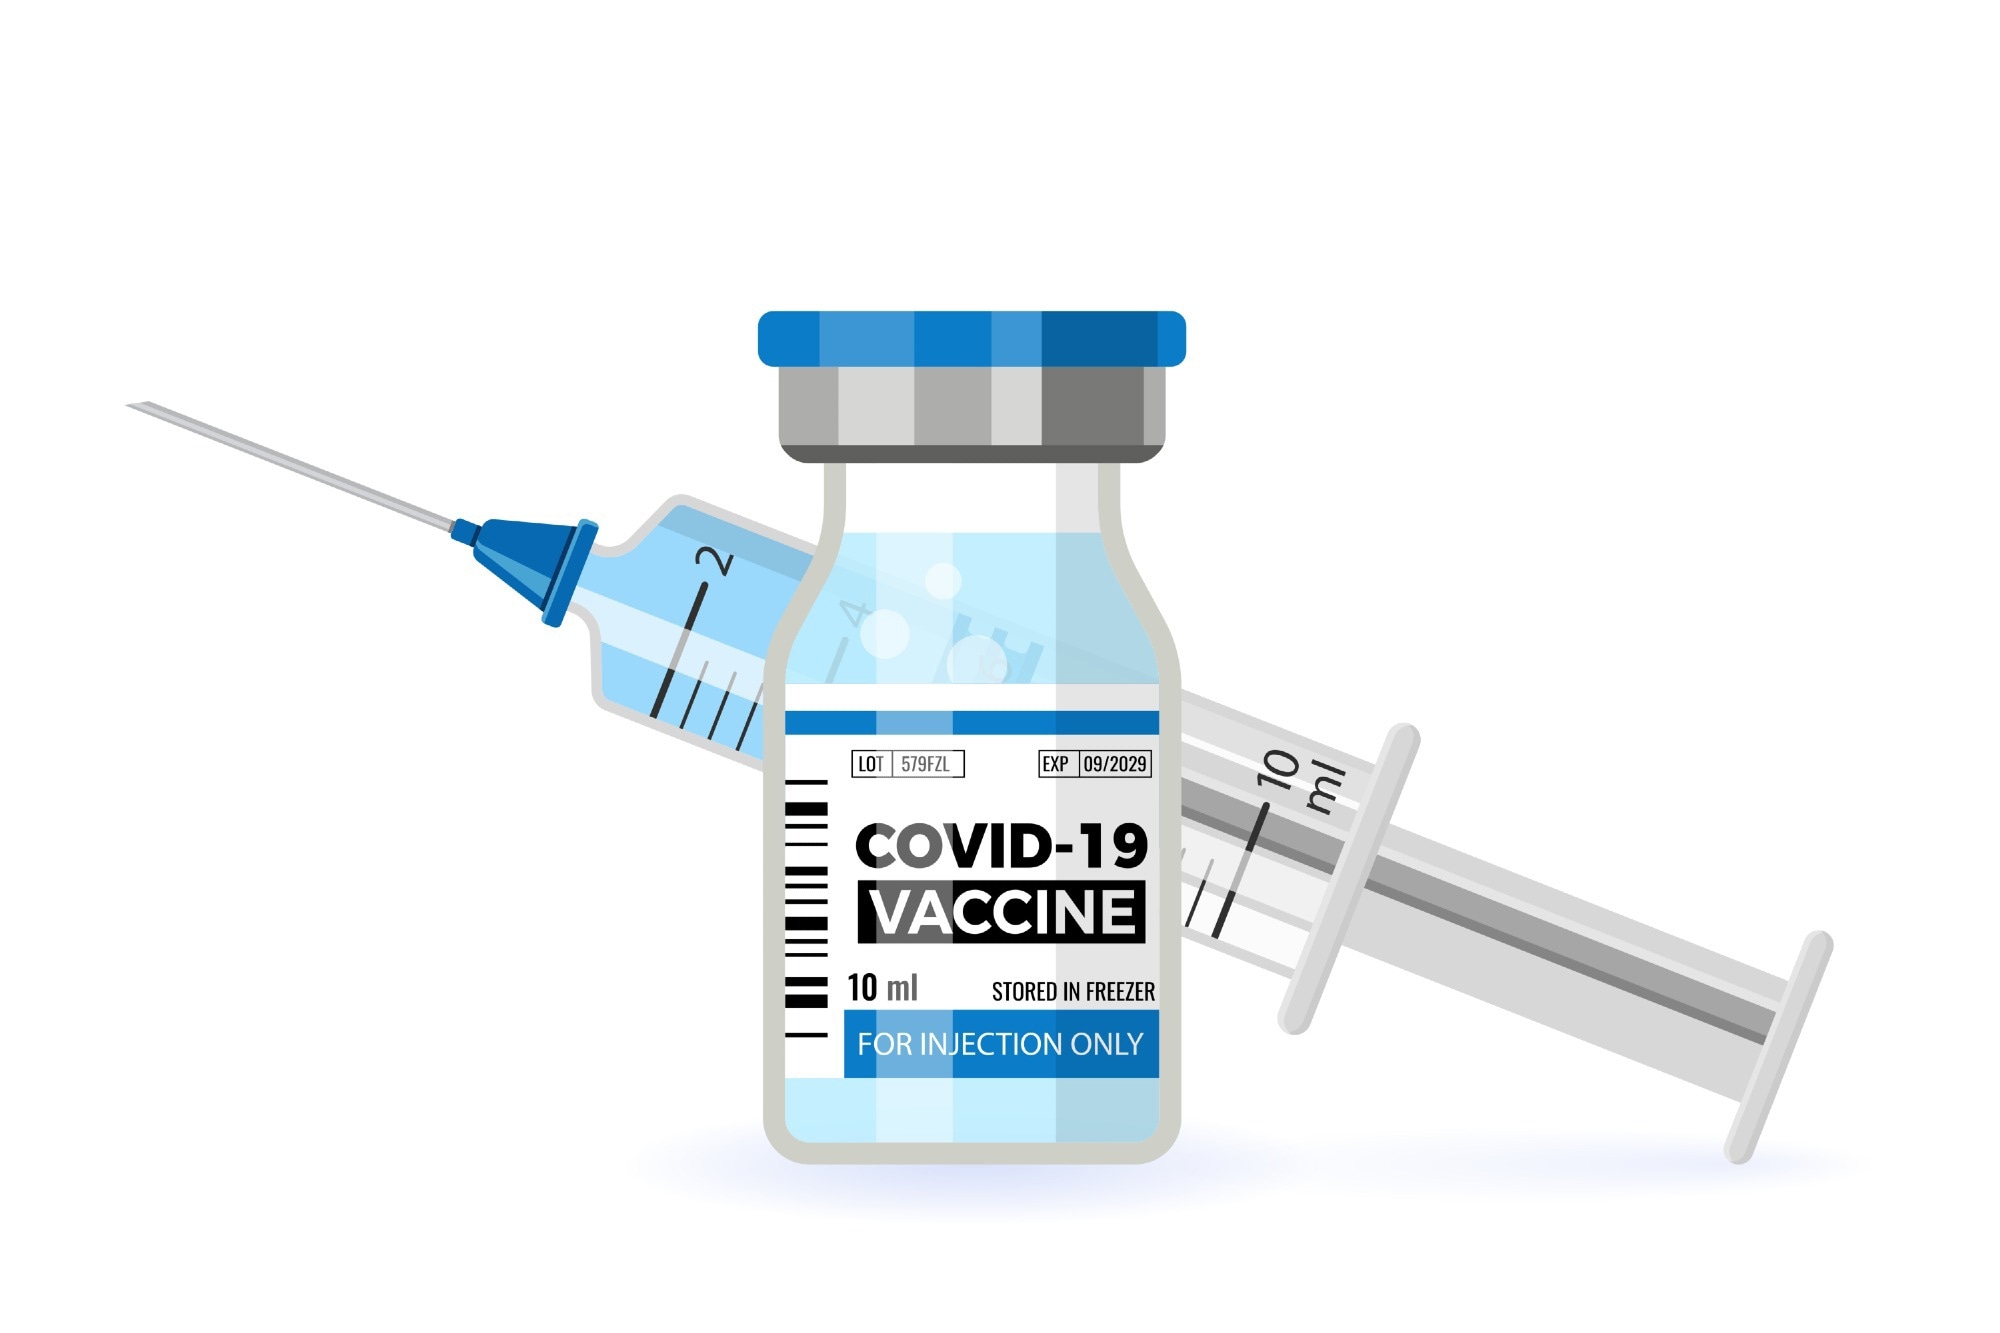 Study: Covid-19 Vaccine Protection among Children and Adolescents in Qatar. Image Credit: Telnov Oleksii/Shutterstock